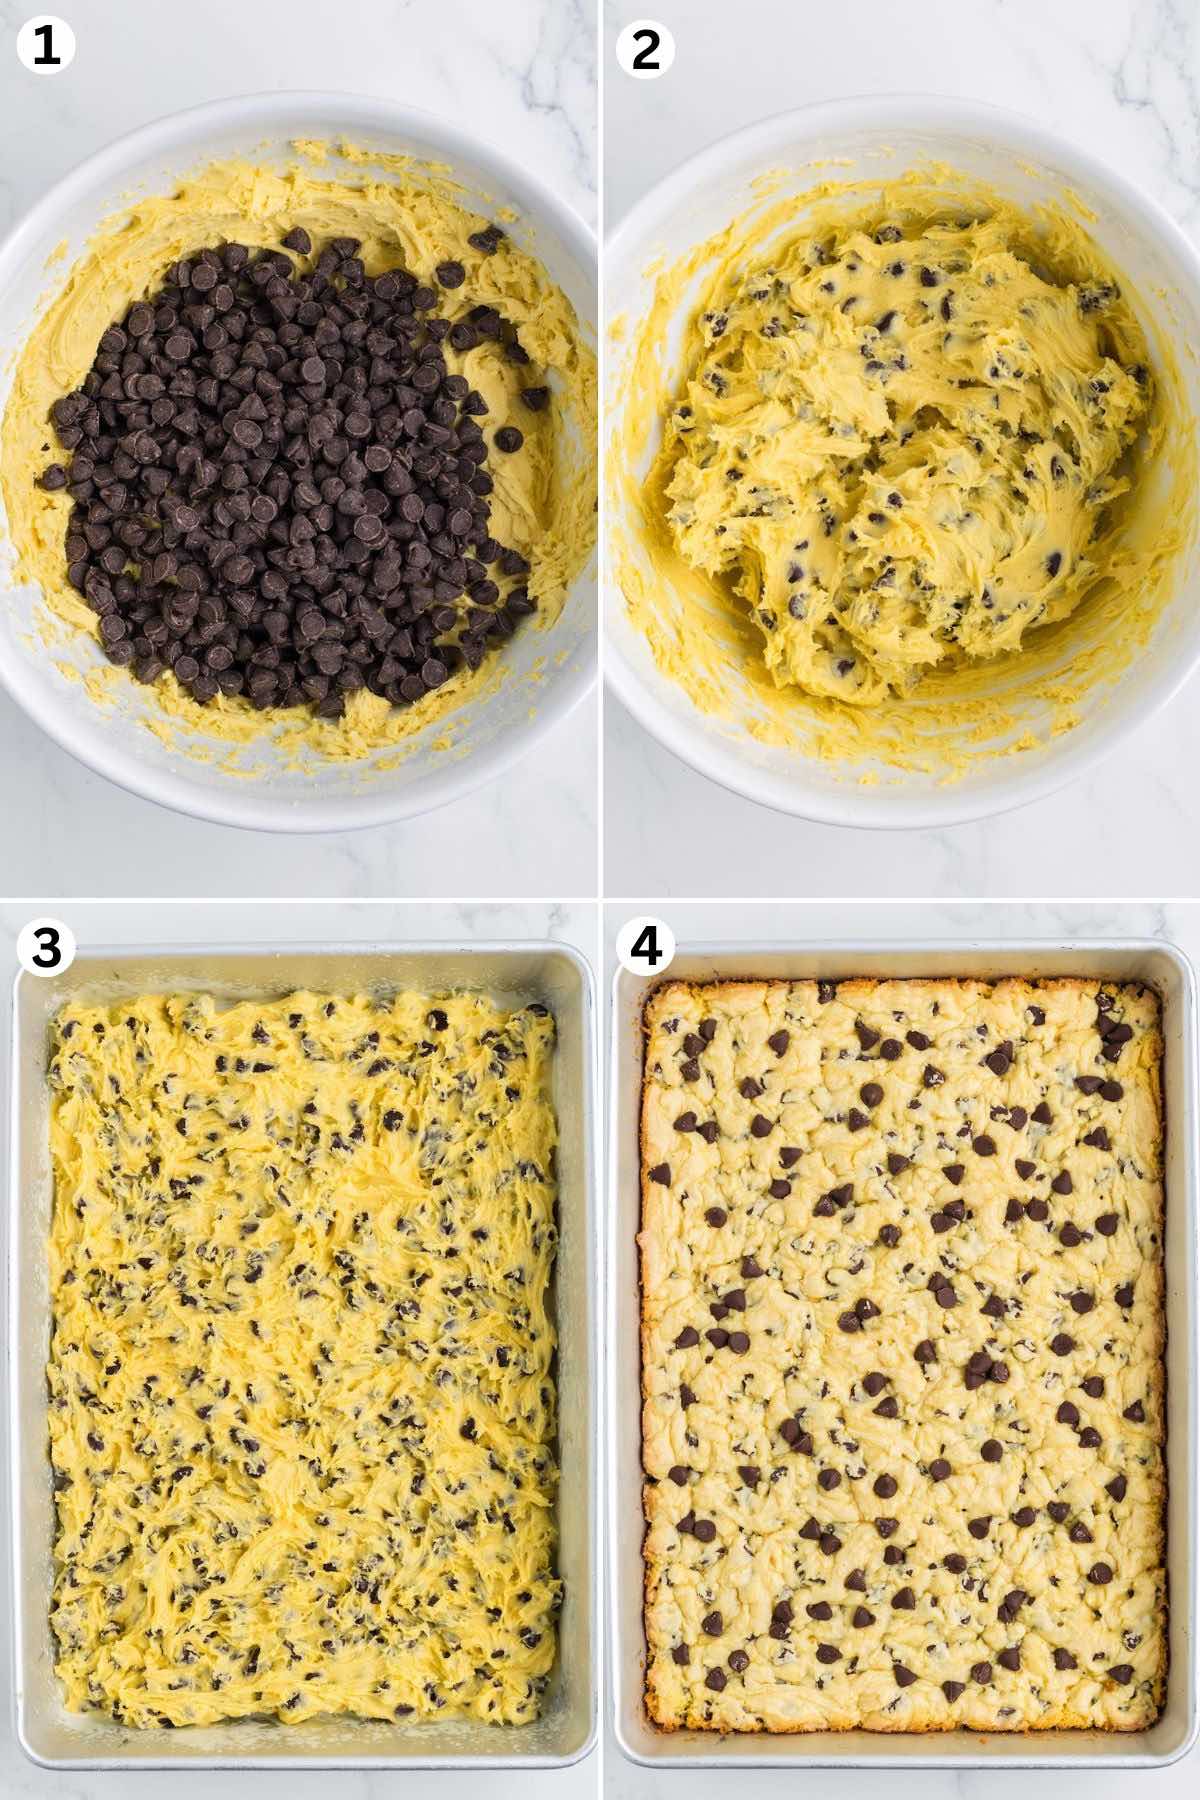 Create the cookie dough. Fold in the chocolate chips. Spread the batter into a greased cake pan. Bake.